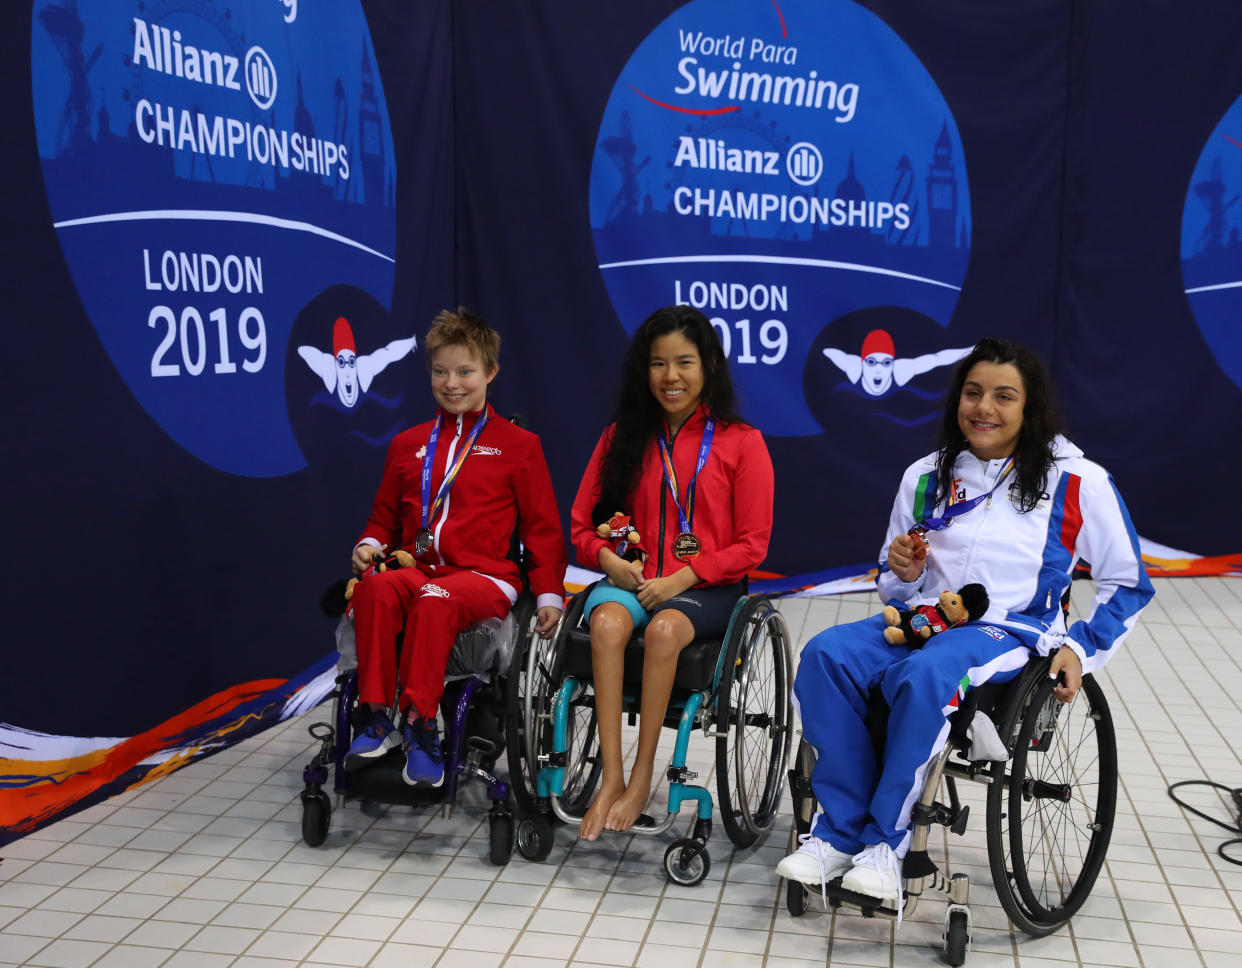 LONDON, ENGLAND - SEPTEMBER 11:  Pin Xiu Yip (gold)  Aly van Wyck-Smart (silver) of Canada and Angela Procida of Italy (bronze) after the Women's 100m Backstroke S2 Final  on Day Three of the London 2019 World Para-swimming Allianz Championships  at Aquatics Centre on September 11, 2019 in London, England. (Photo by Catherine Ivill/Getty Images)